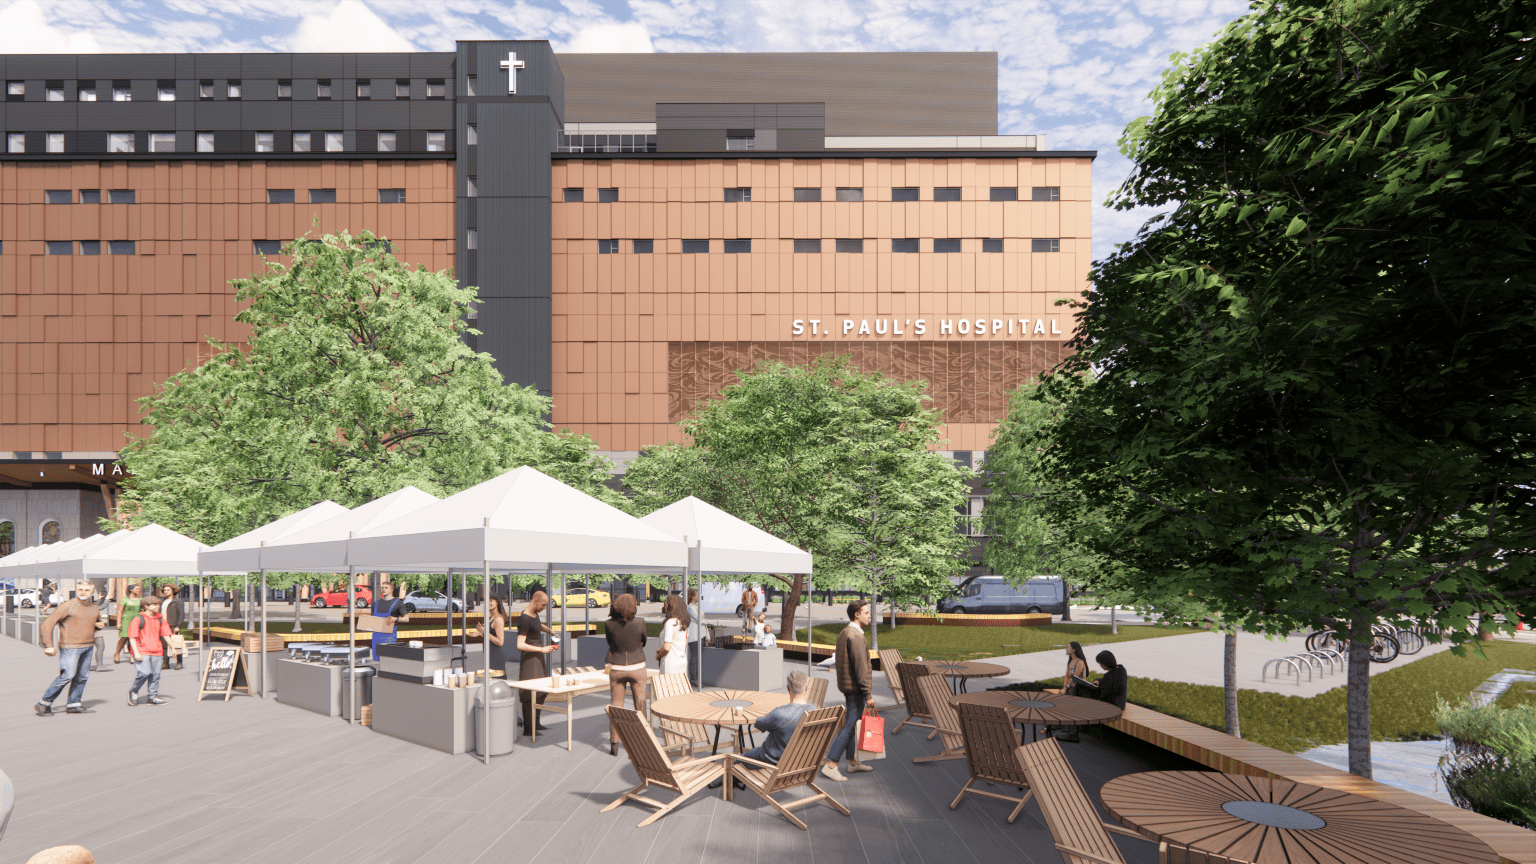 Rendering of the civic plaza market at the new St. Paul's Hospital campus.